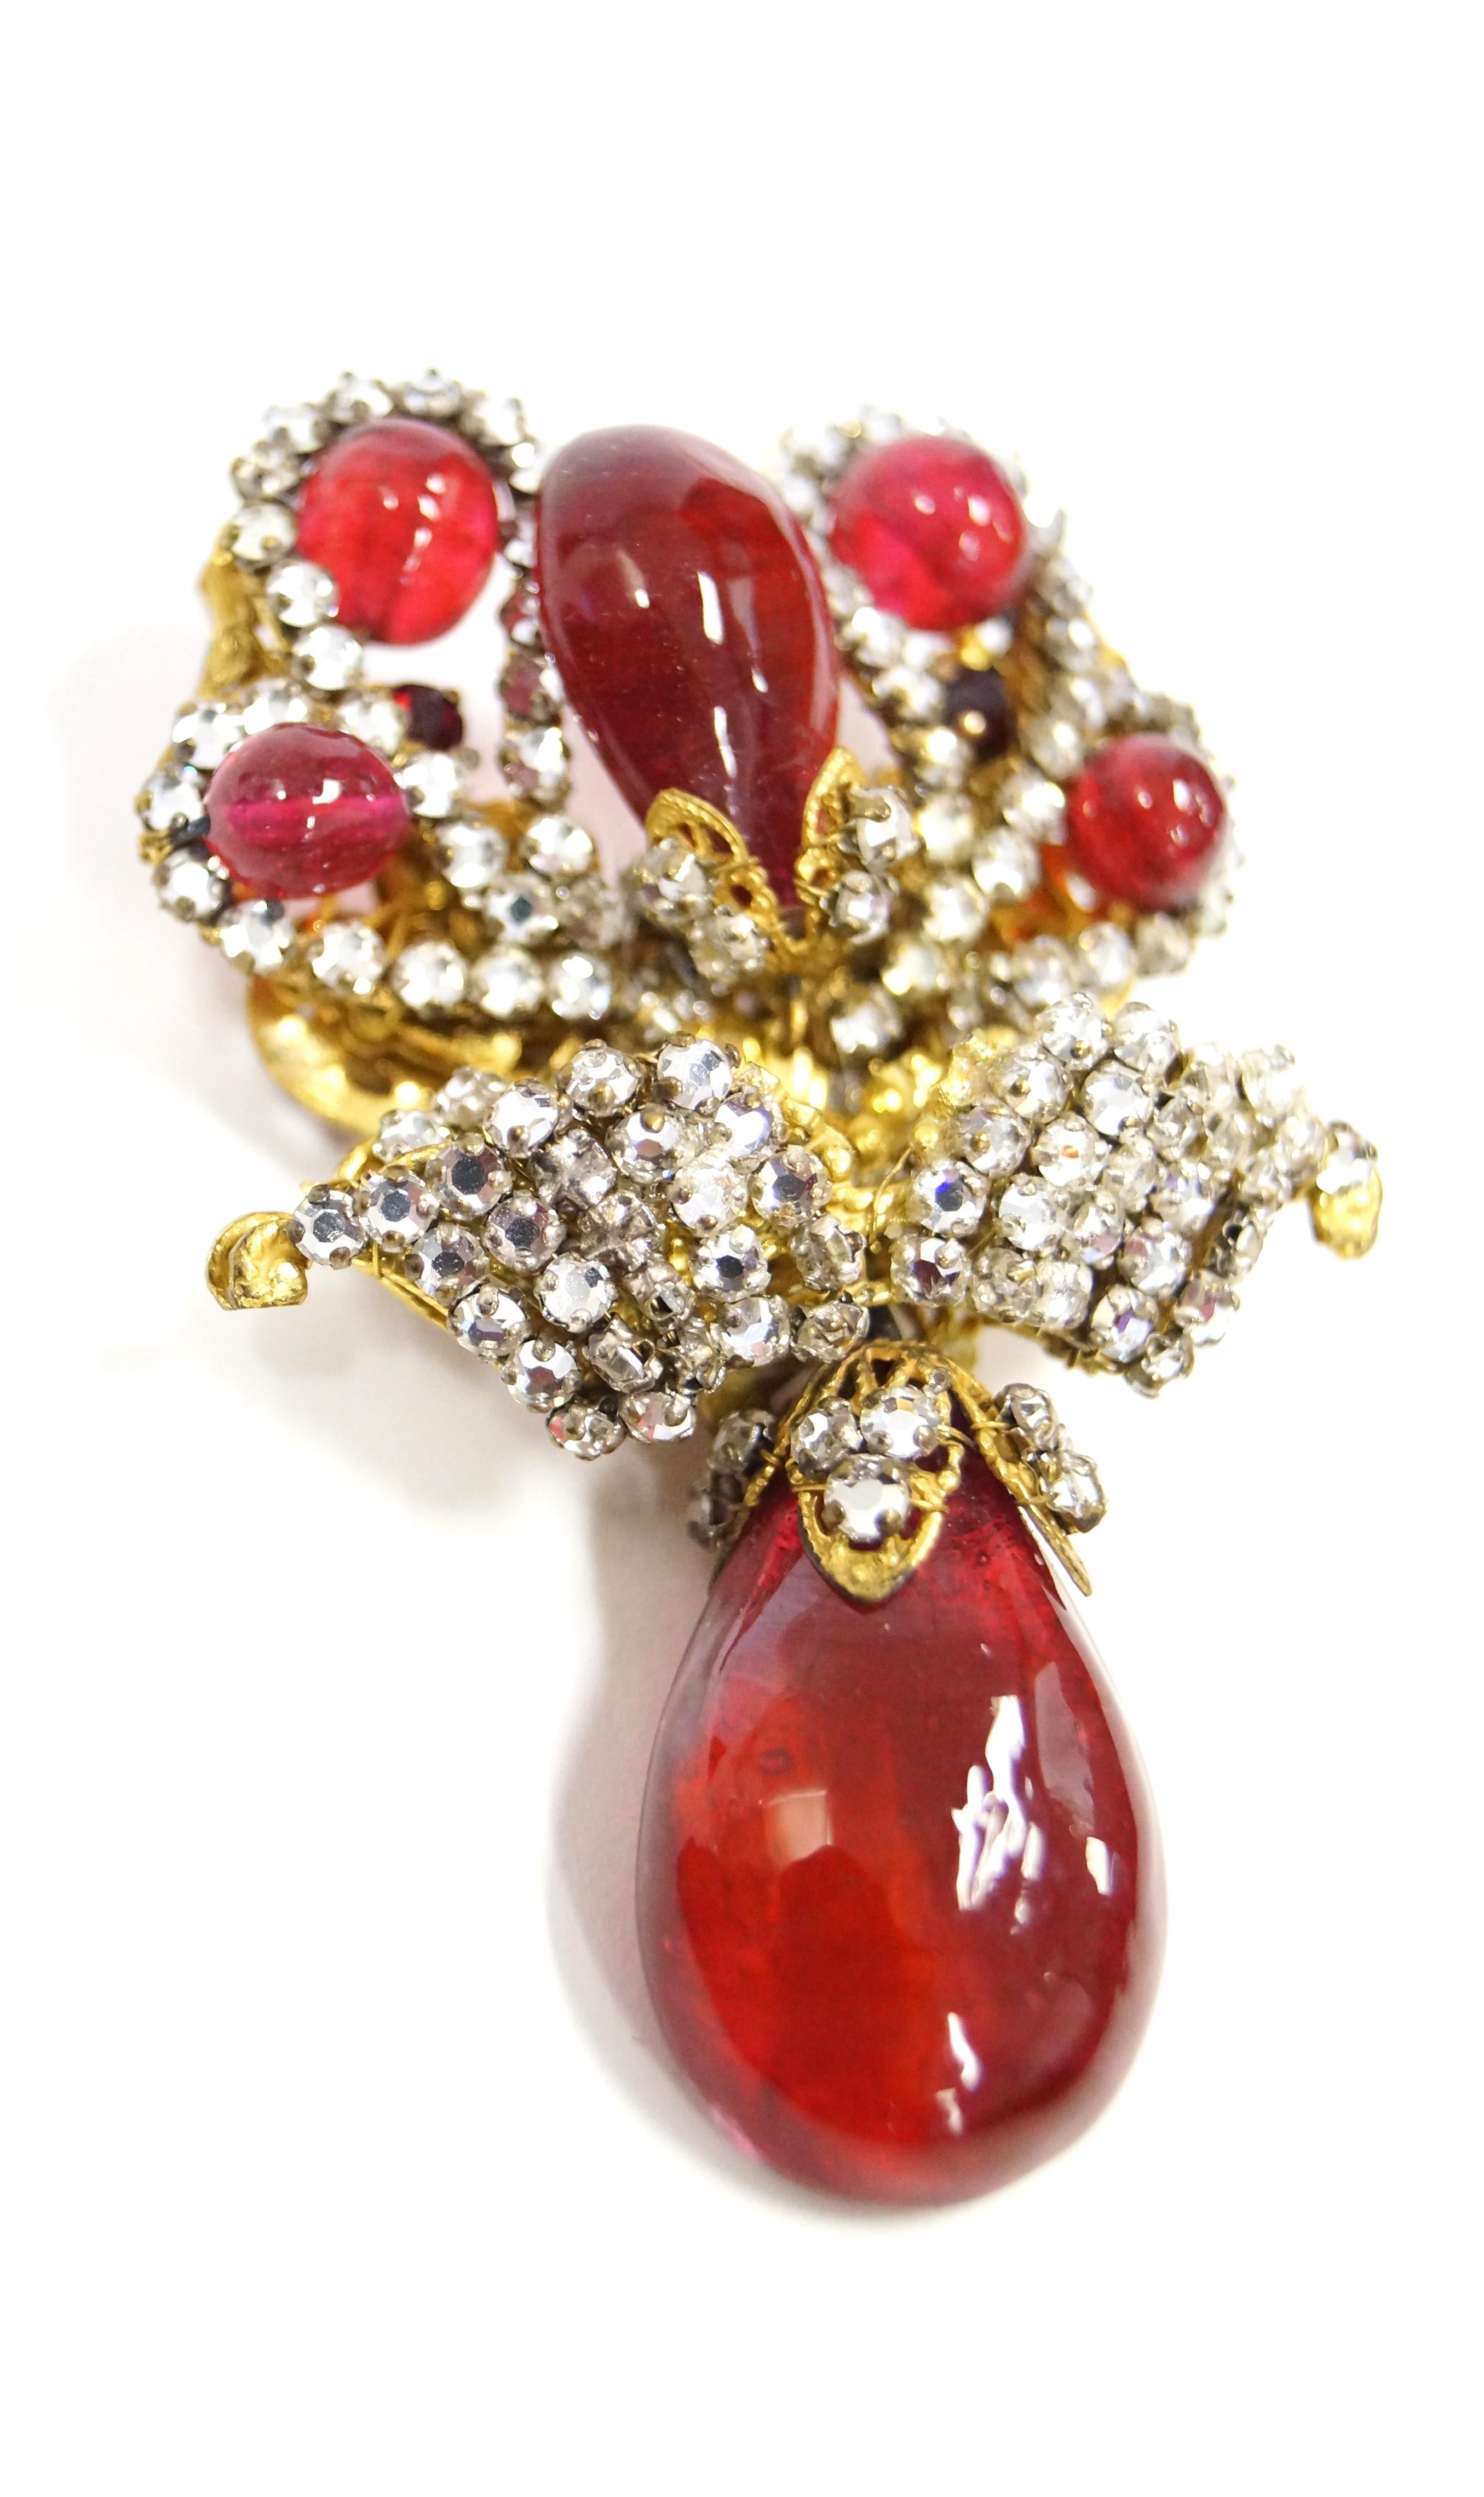 Exquisite ruby poured glass and rhinestone regal brooch all affixed to an antiqued gold filigree setting consisting of three moving parts. Large tear drop bead hangs from a loop allowing motion. All stones are sewn in with gilt wire in the typical